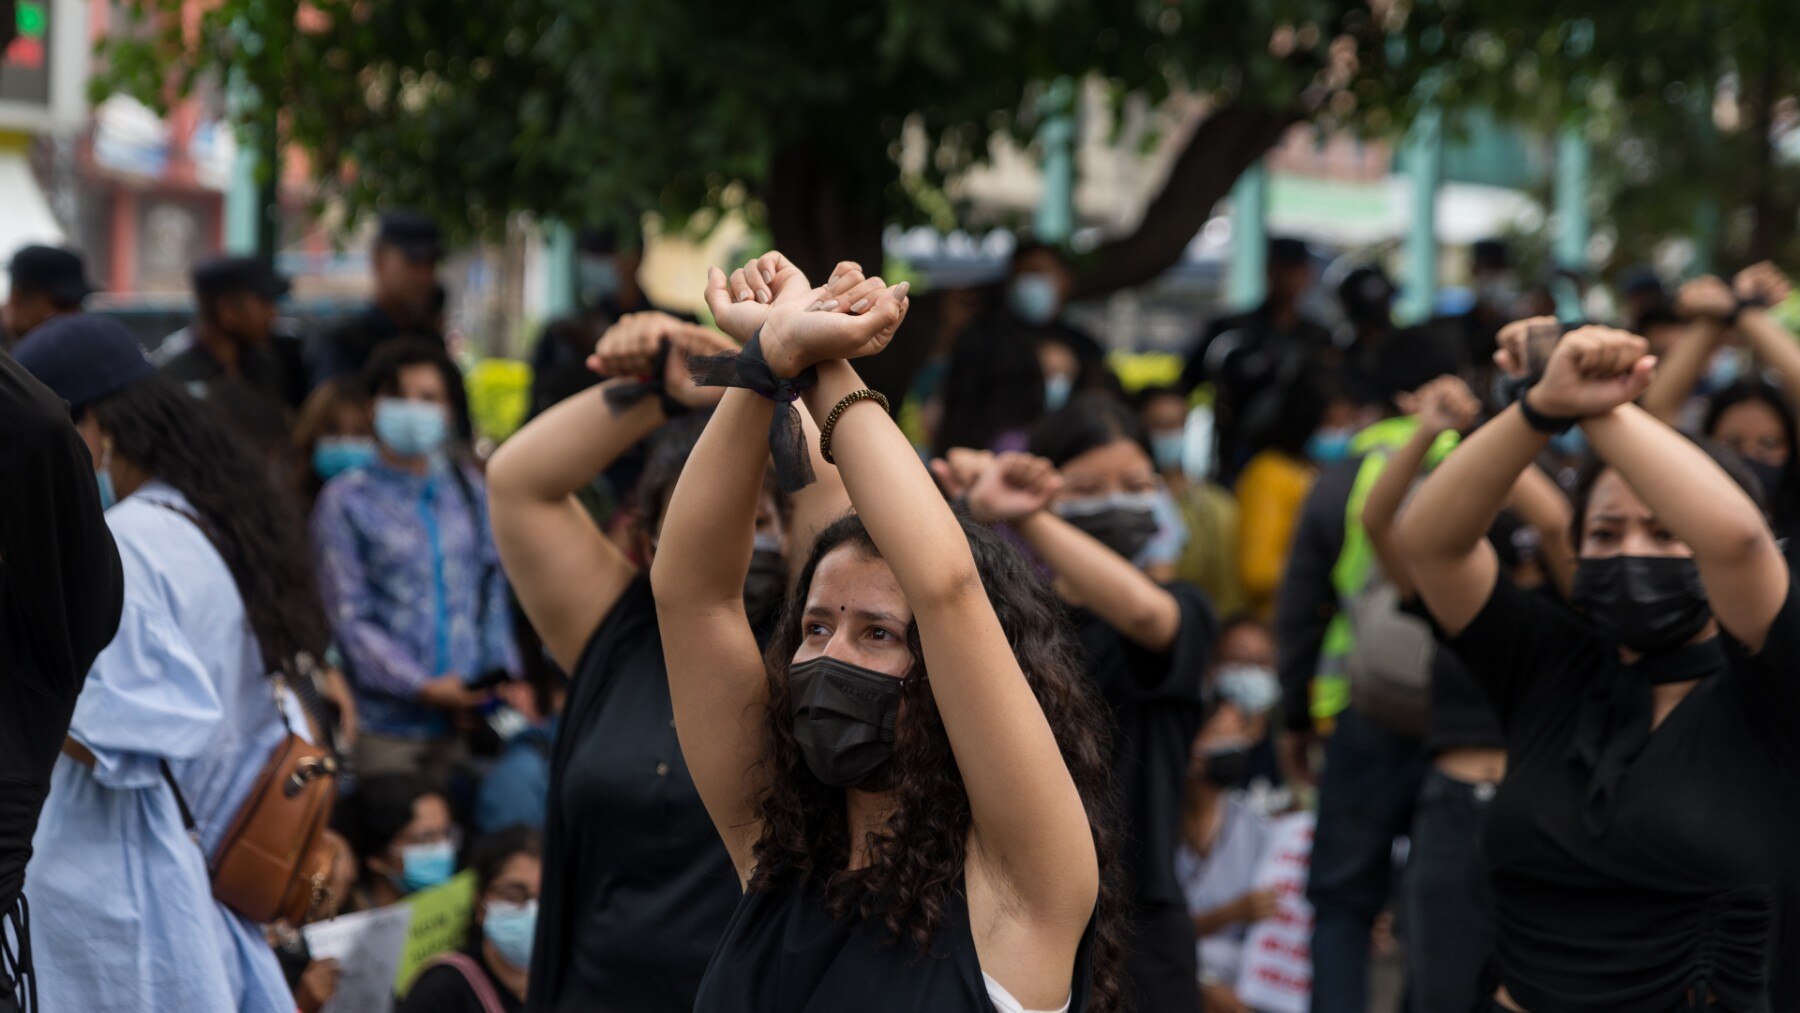 Youths seen making gestures during the protest.